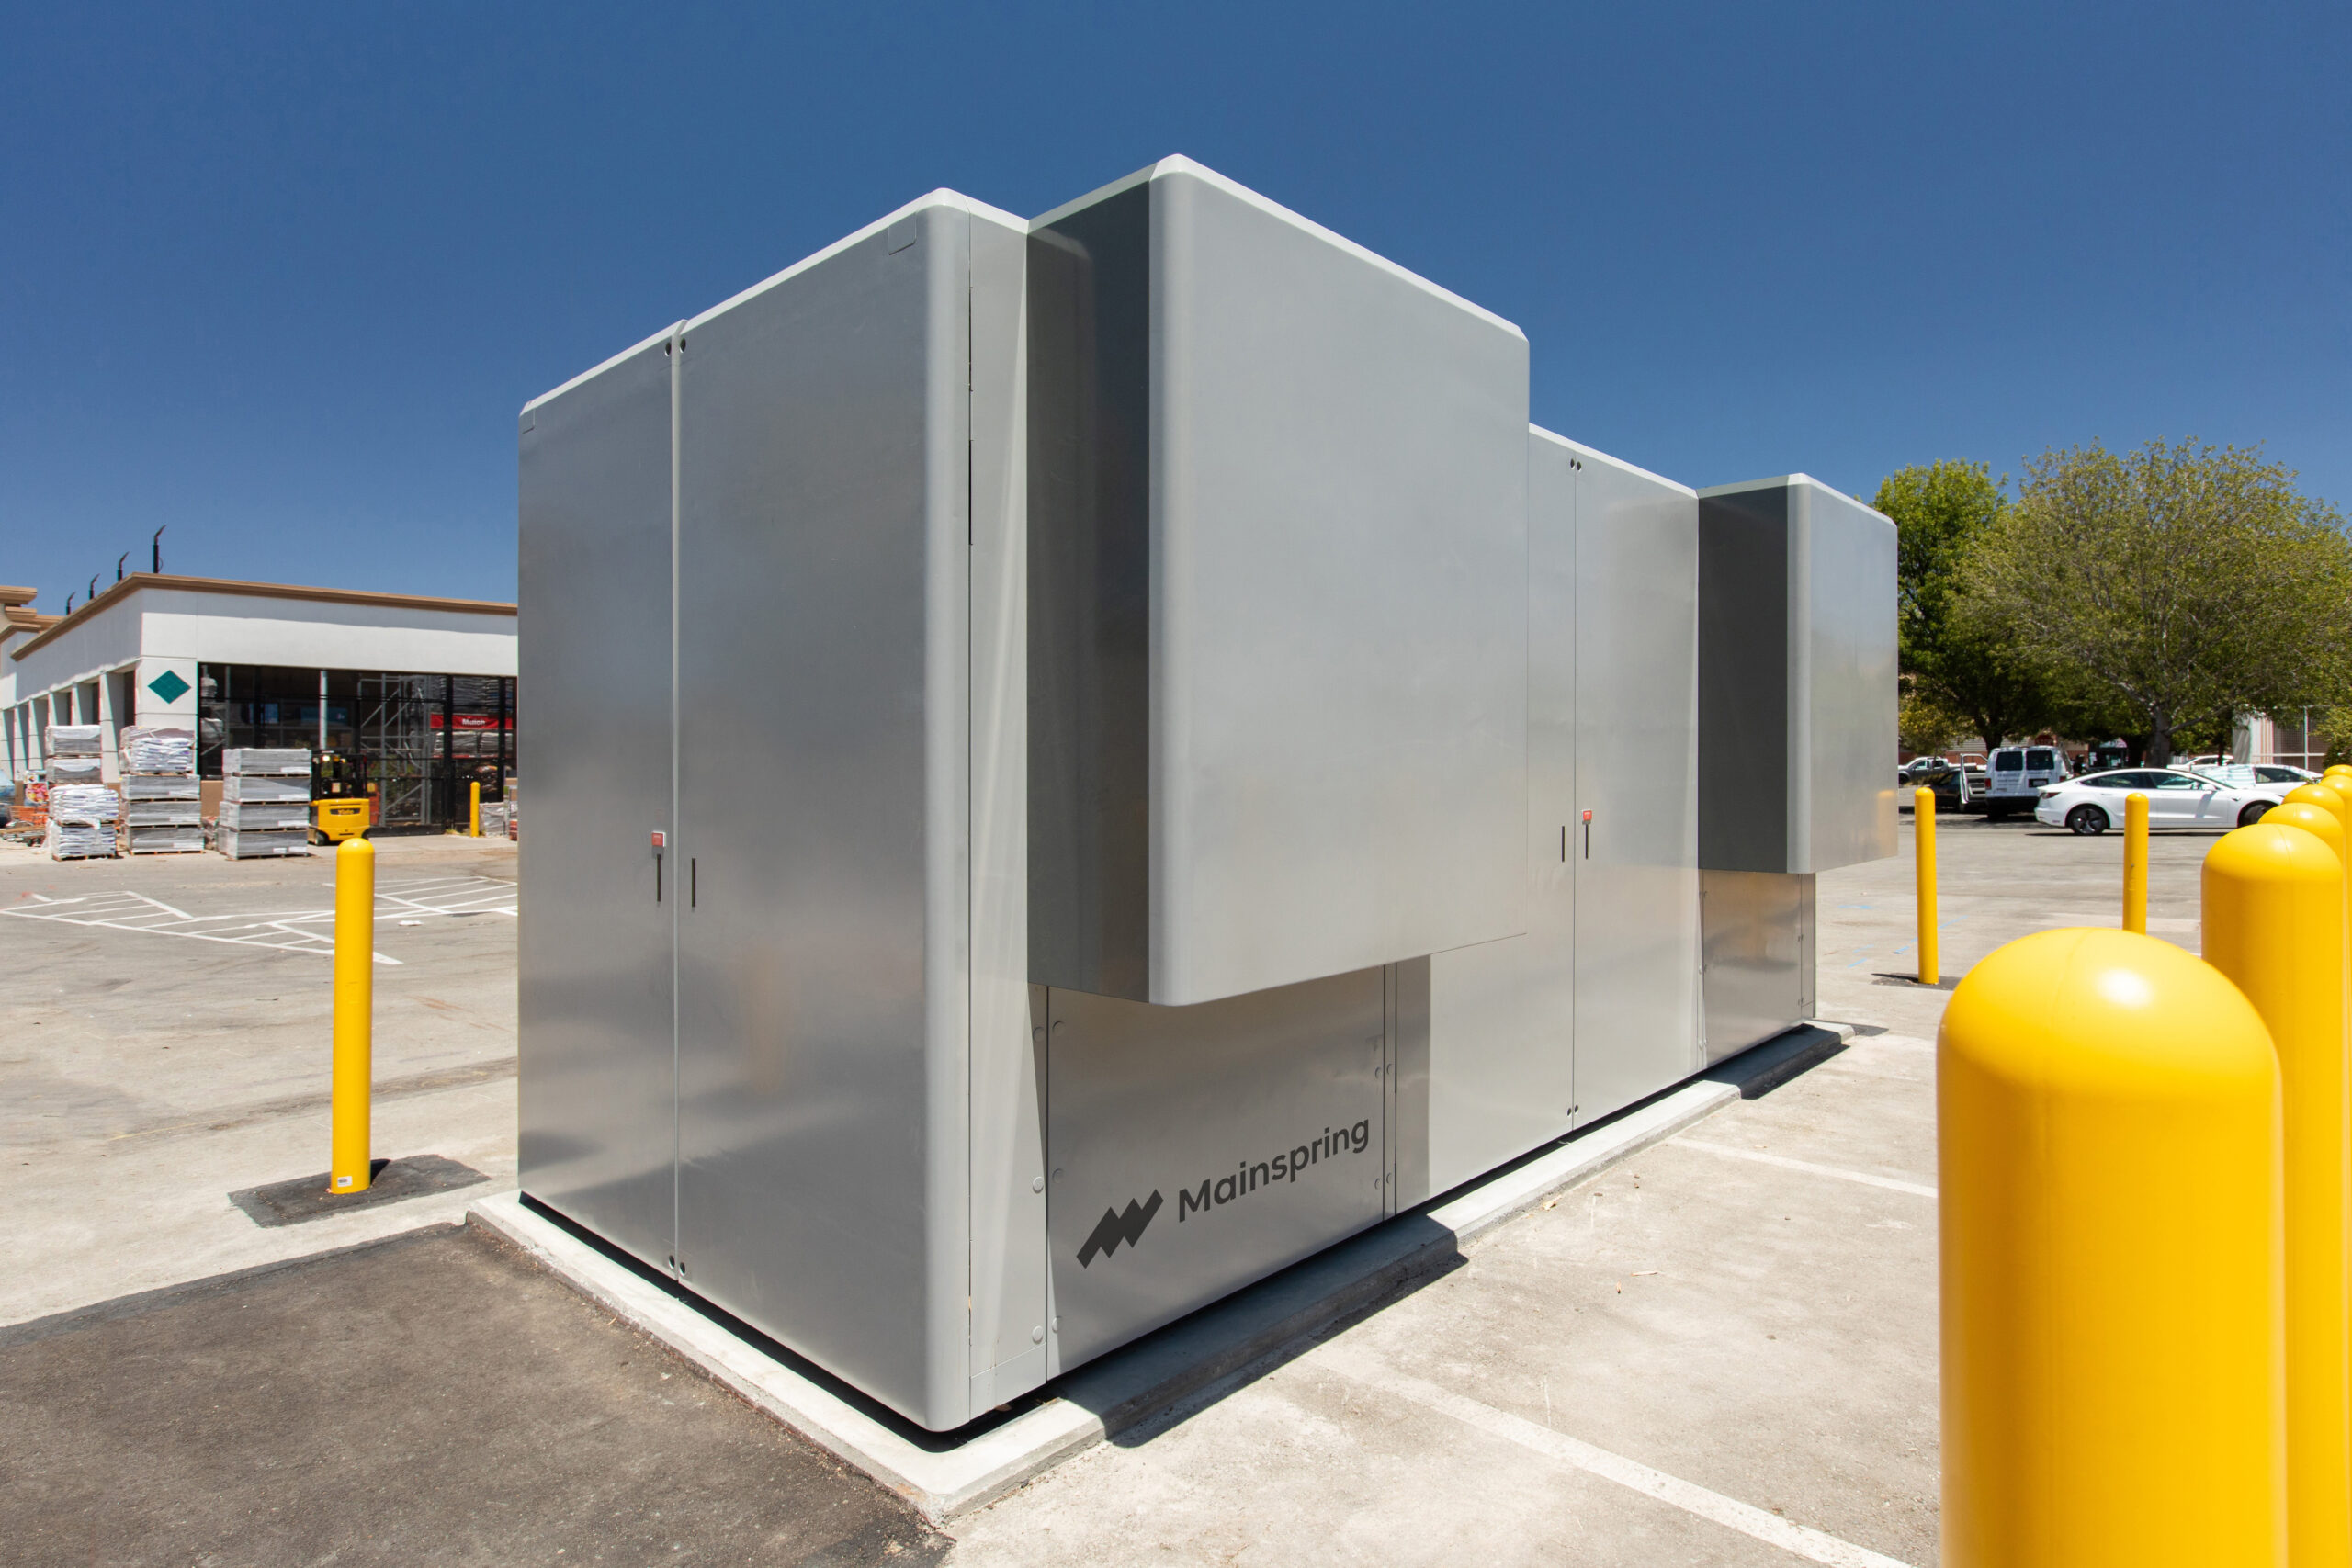 NapaSan Teams with NextEra Energy Resources for New Biofuel Mainspring Linear Generator